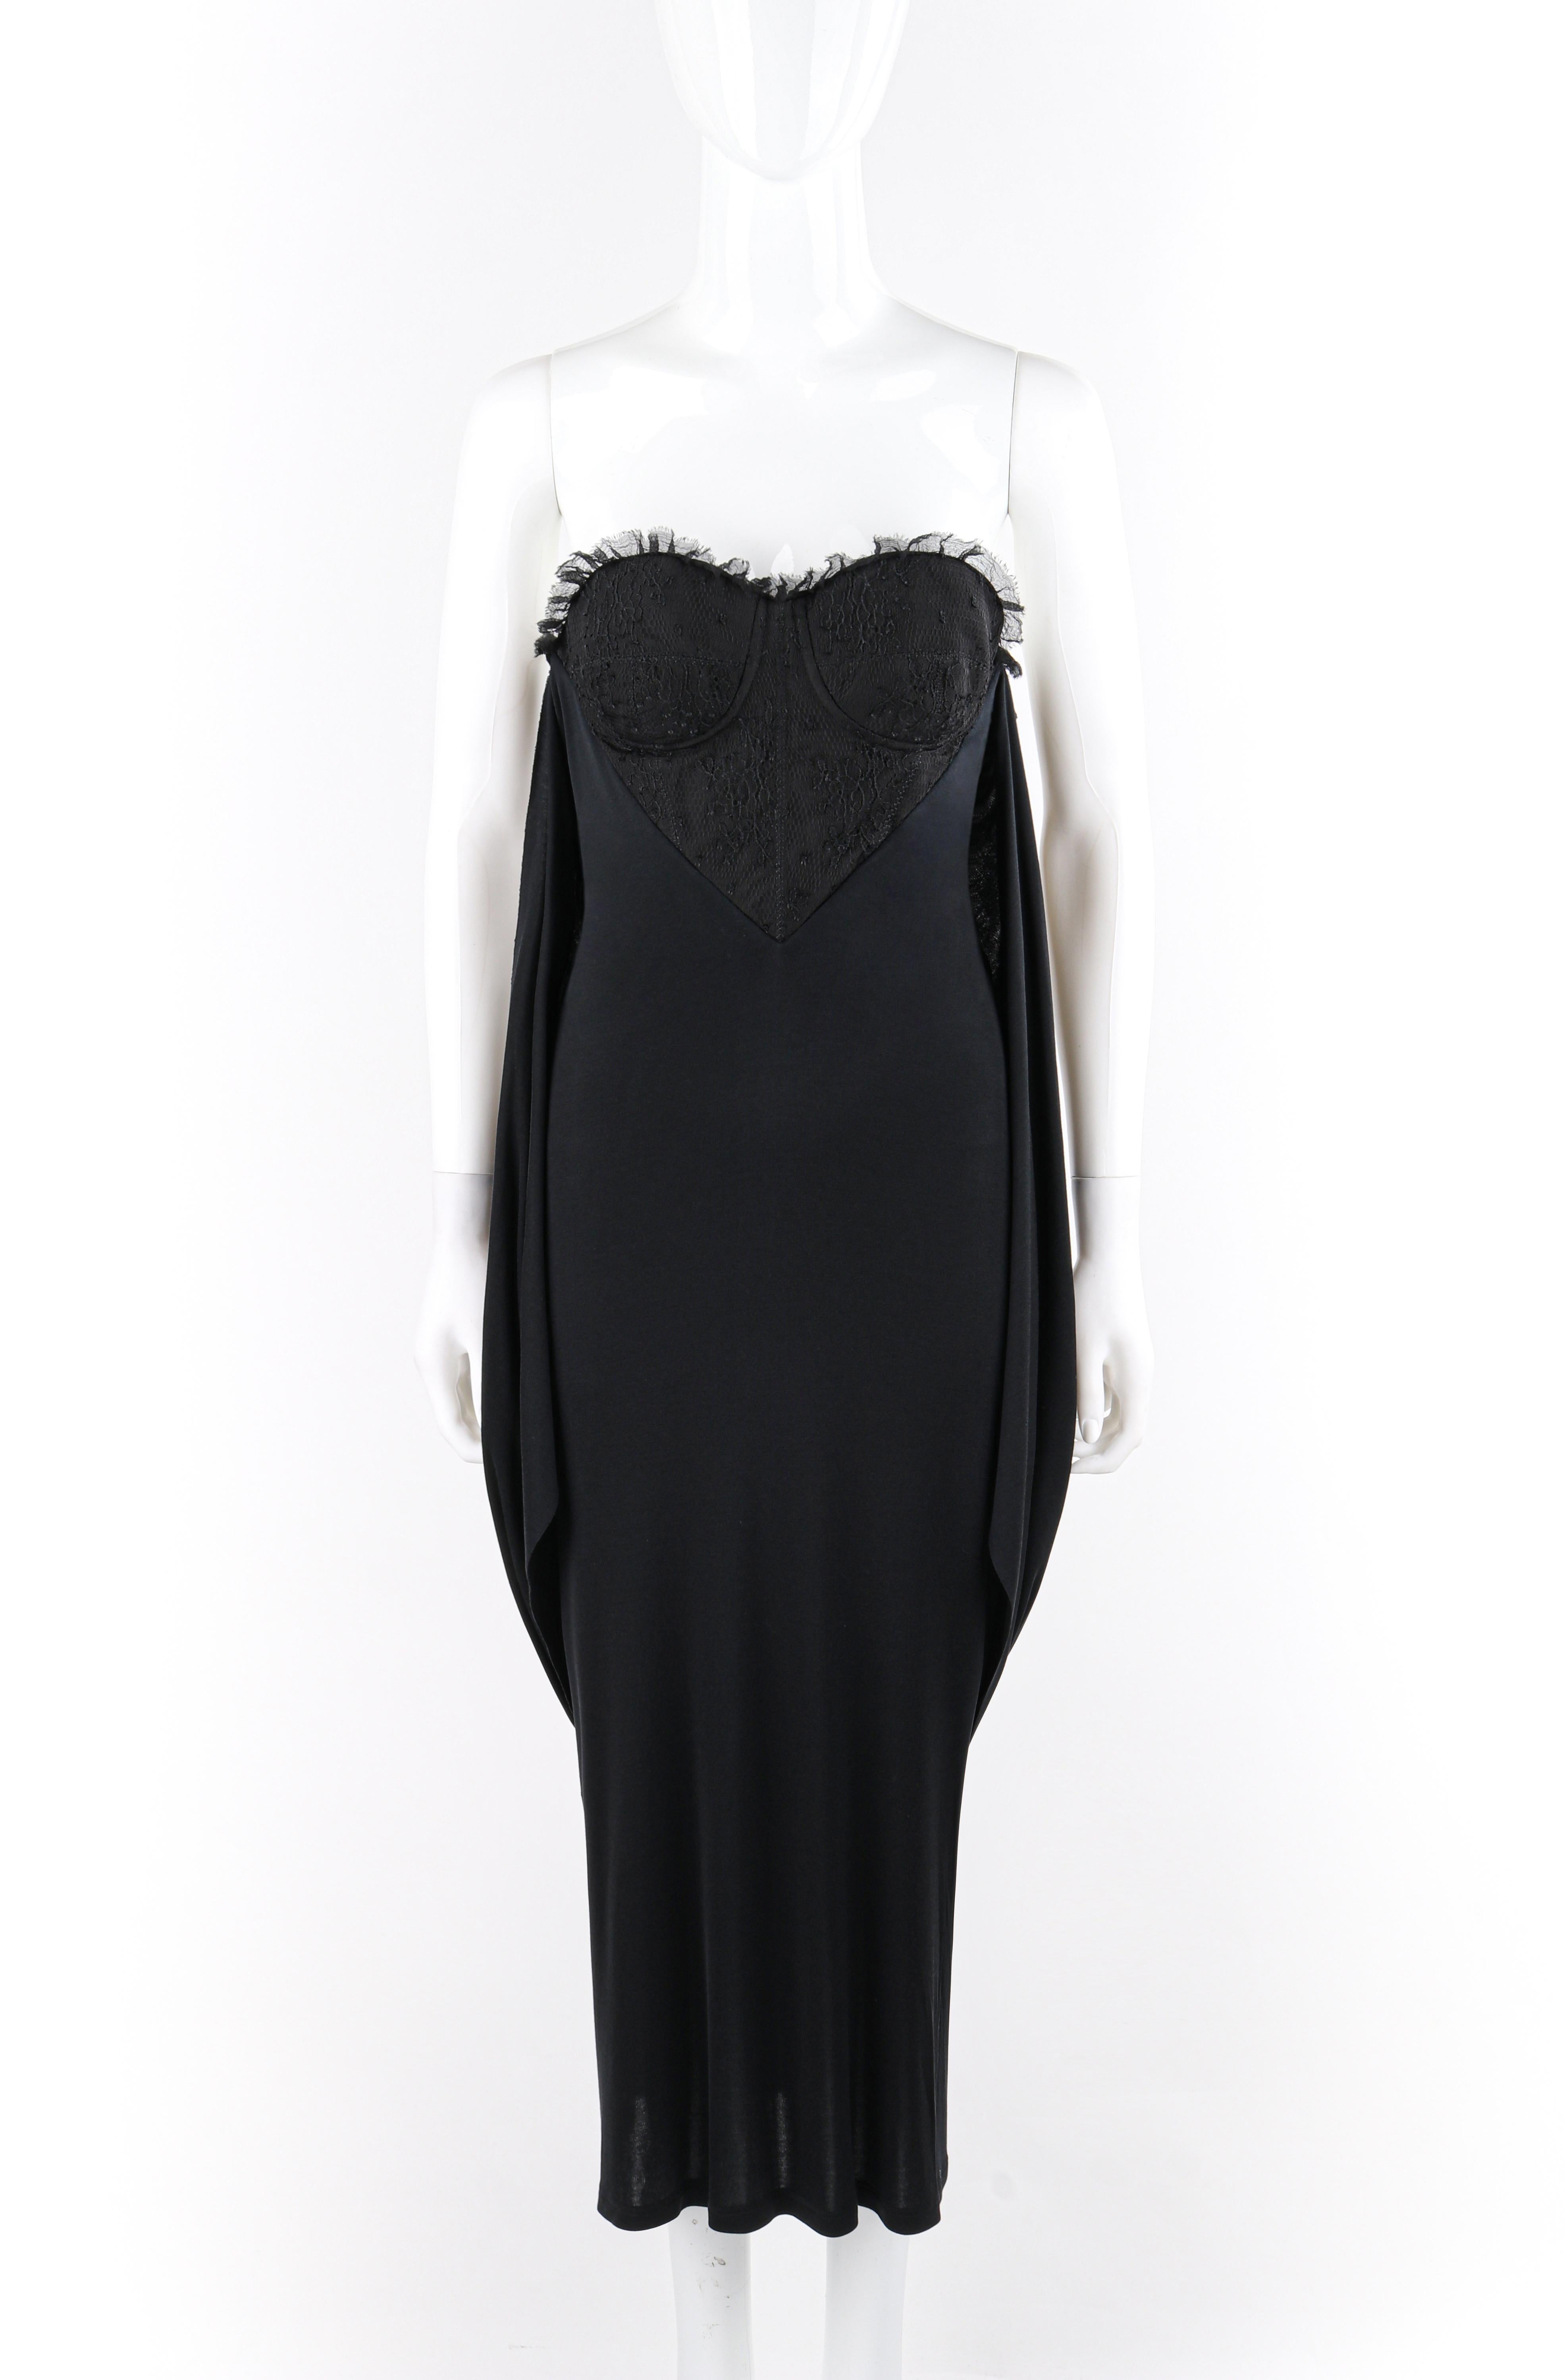 ALEXANDER McQUEEN S/S 2004 Black Multiway Bustier Midi Length Evening Dress
 
Brand / Manufacturer: Alexander McQueen
Collection: S/S 2004 
Style: Bustier dress
Color(s): Shades of black
Lined: No
Marked Fabric Content: 64% rayon viscose, 30% seta